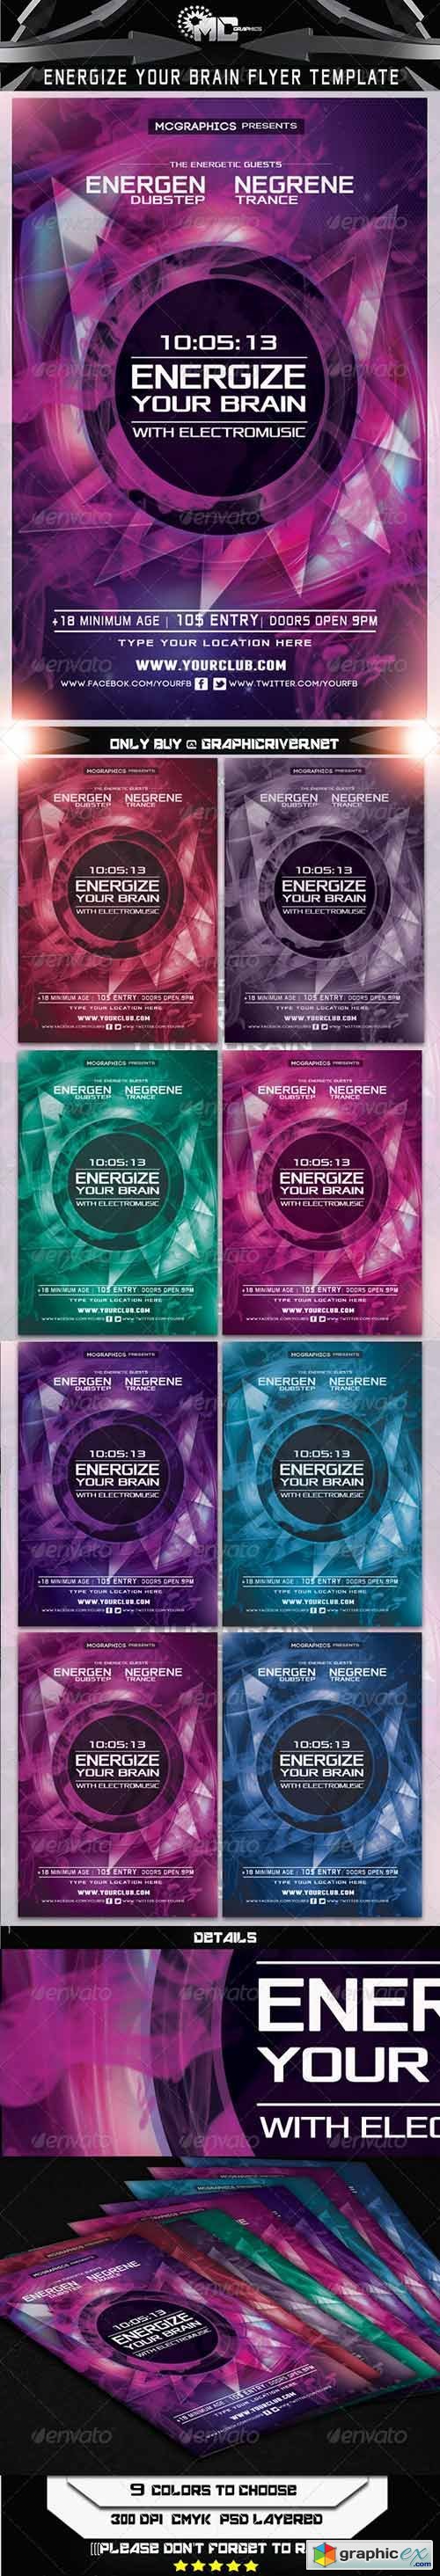 Energize your Brain Flyer Template